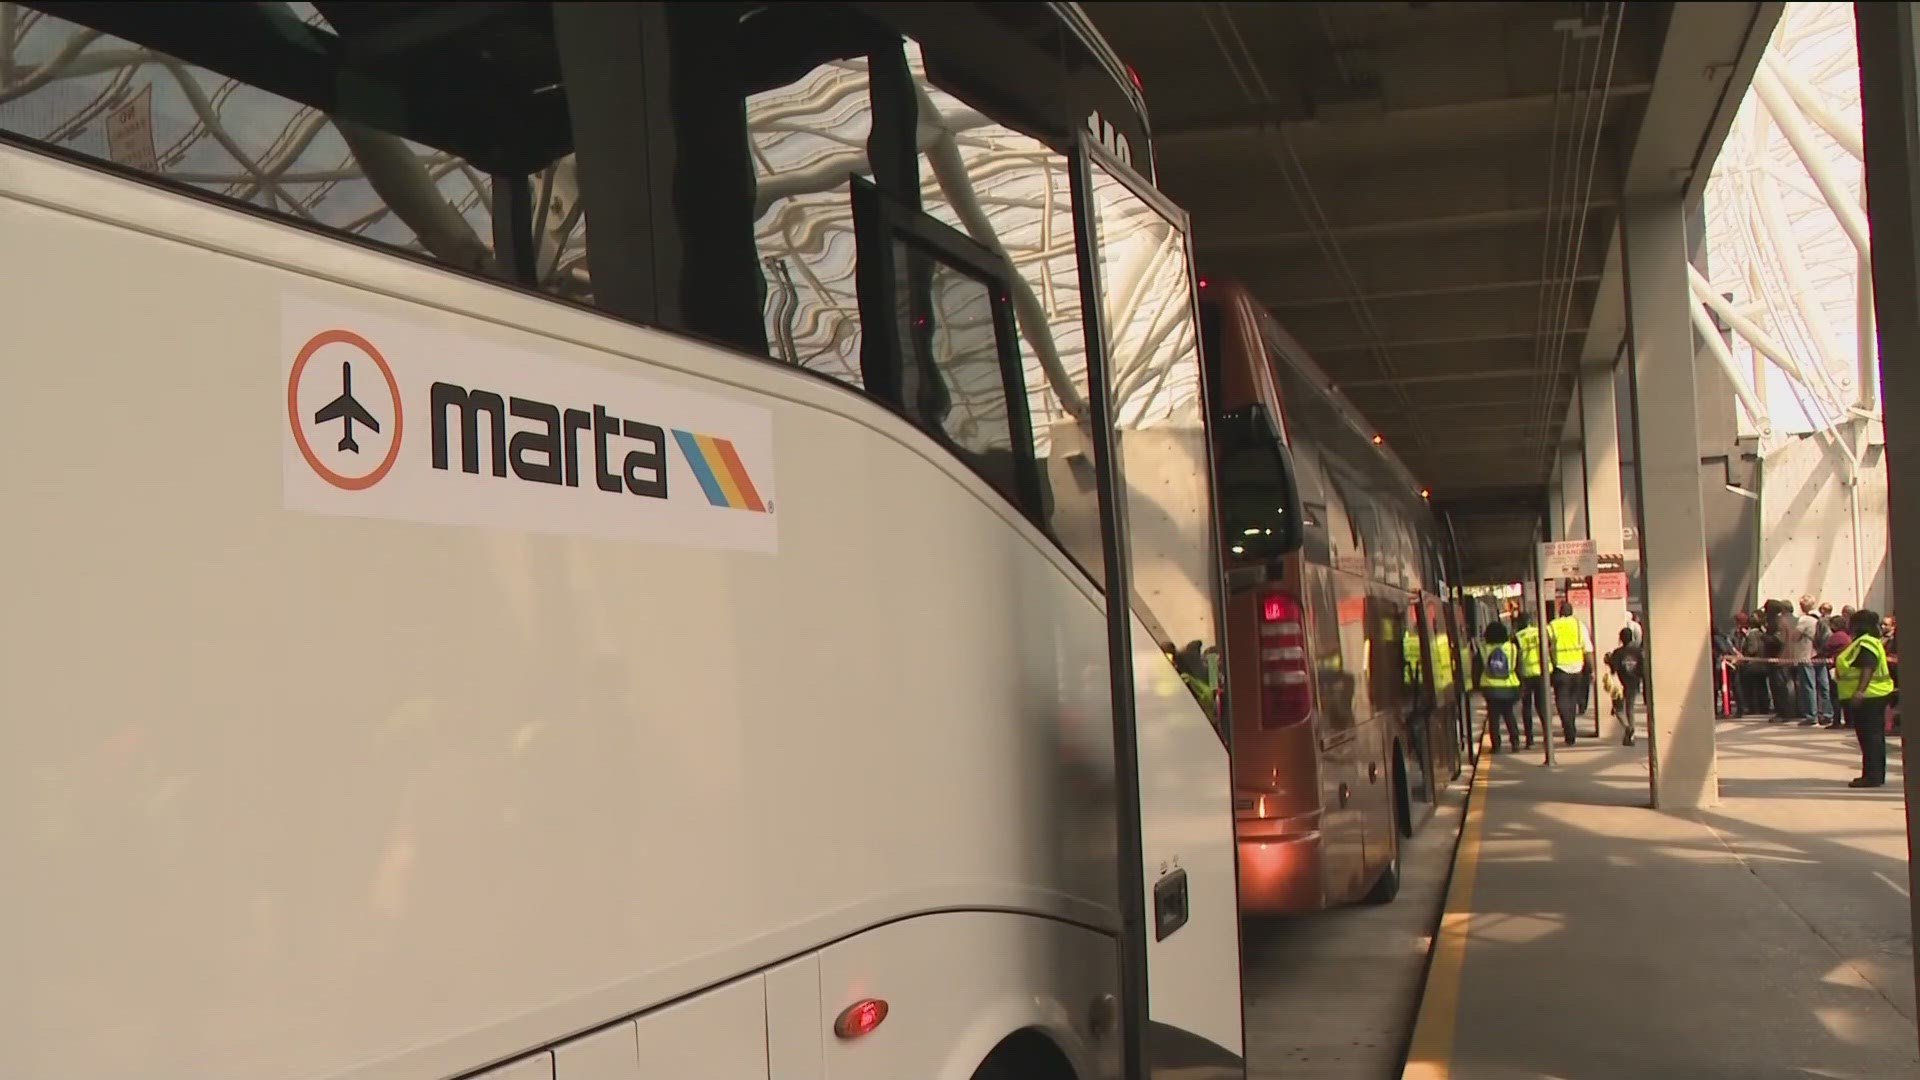 A MARTA spokesperson says the closure is to renovate the concourse and platform level.